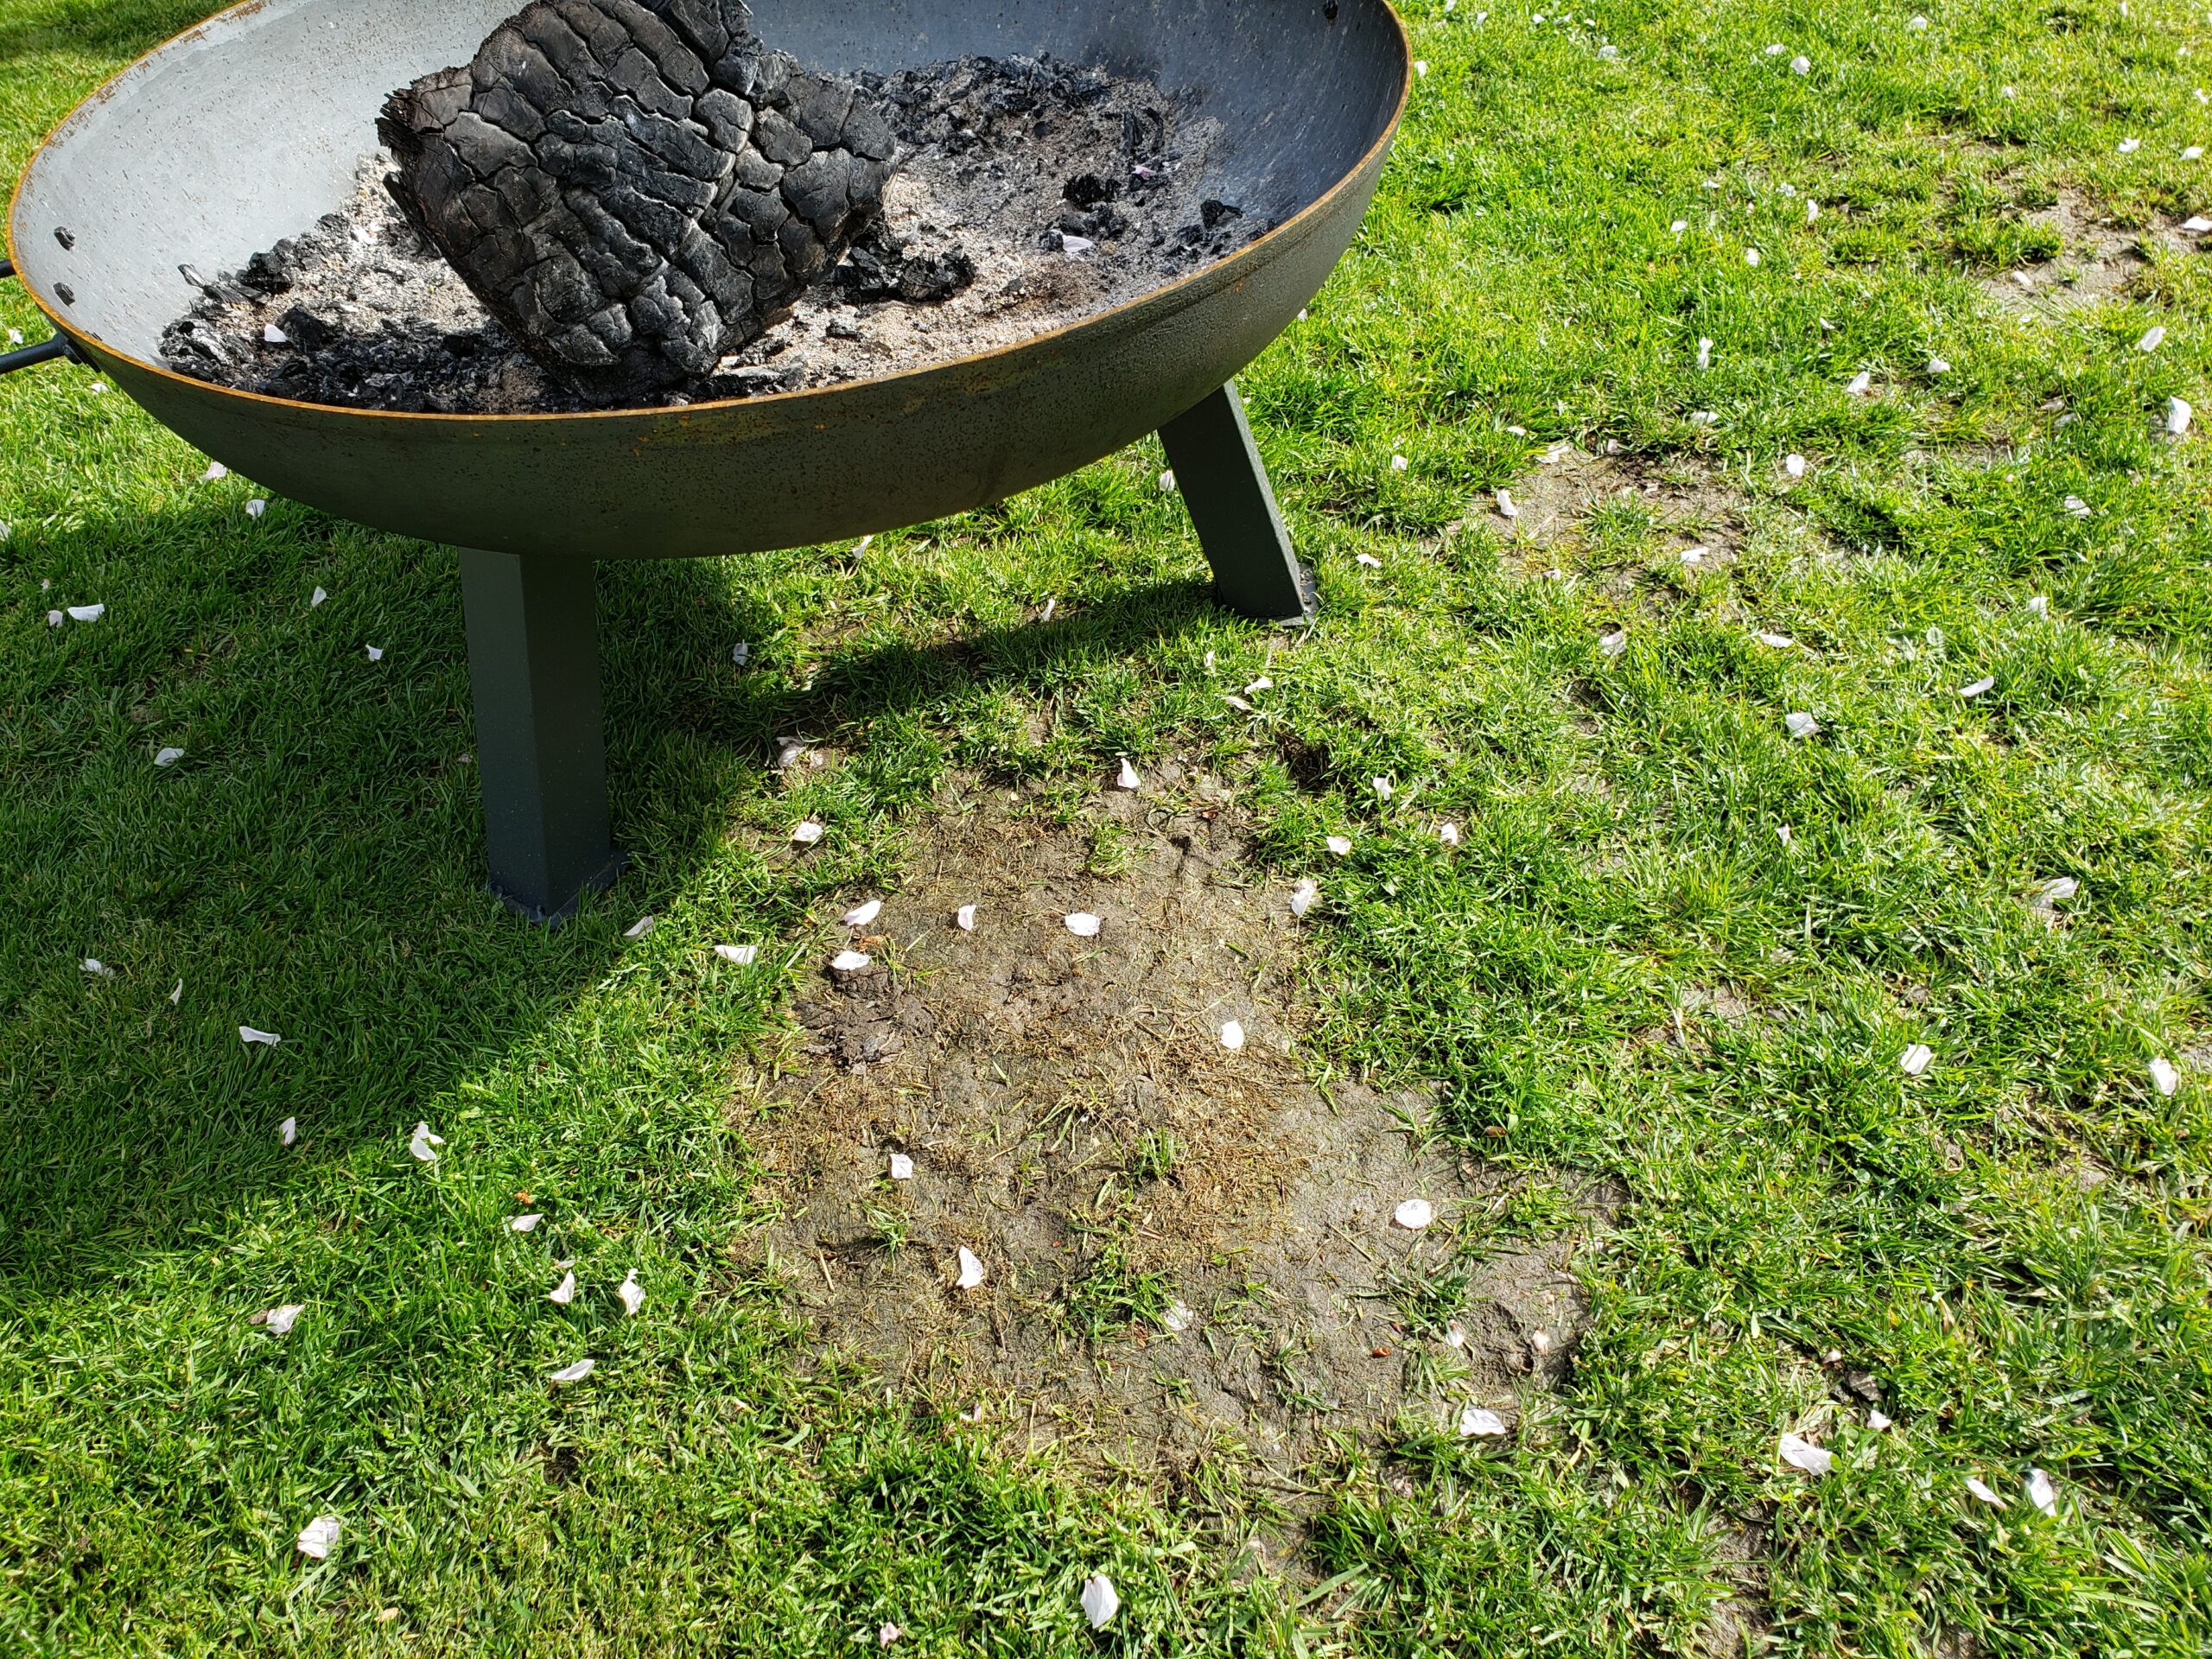 Fire Pit On Grass 5 Best Ways To, How To Put A Fire Pit On Grass